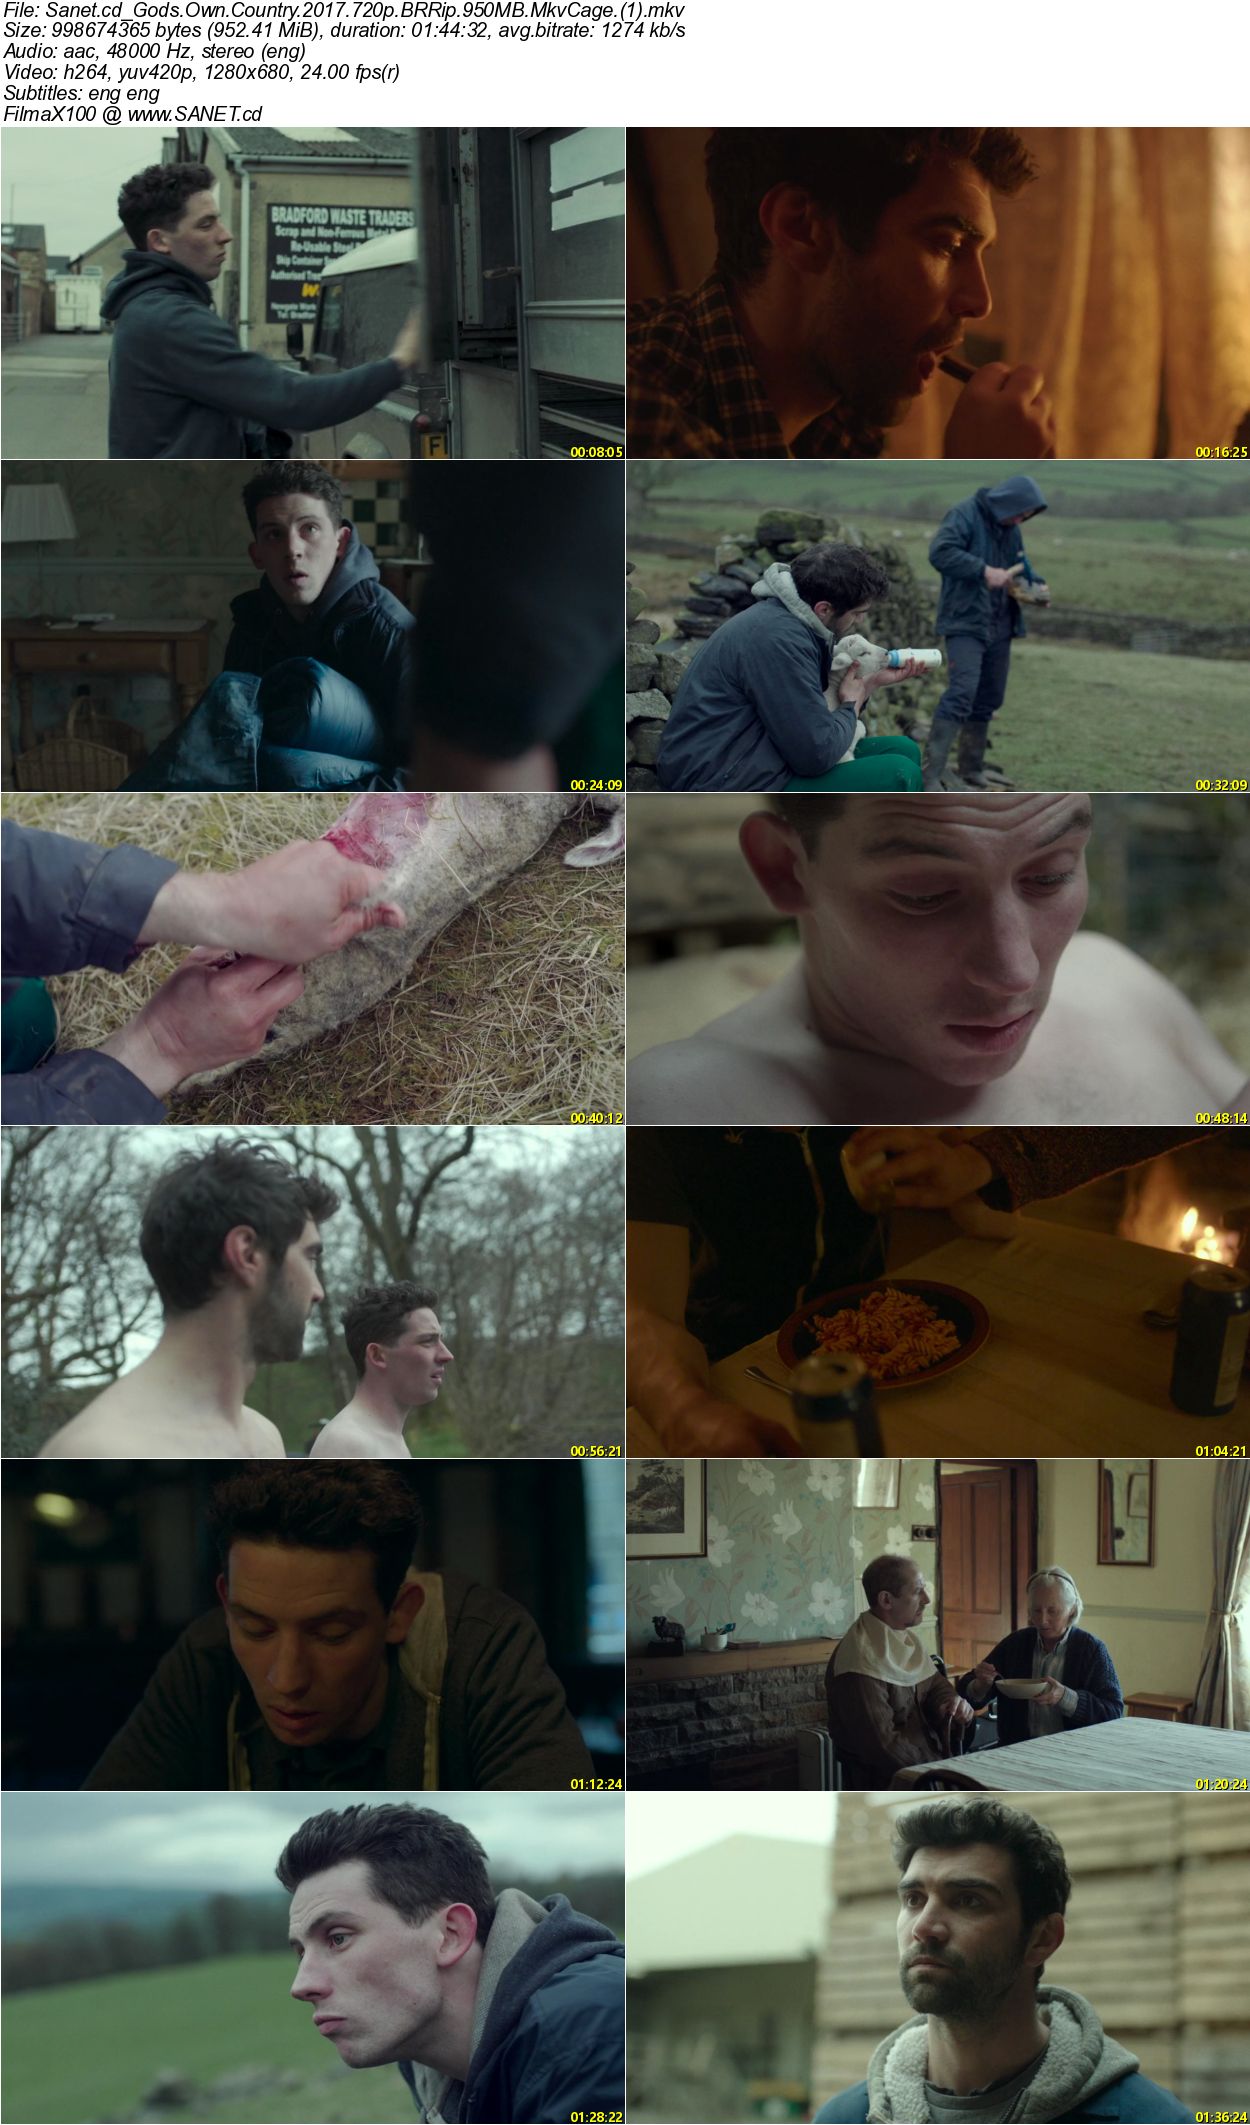 Другая страна 2017. God's own Country 2017. Berala Gods own Country.